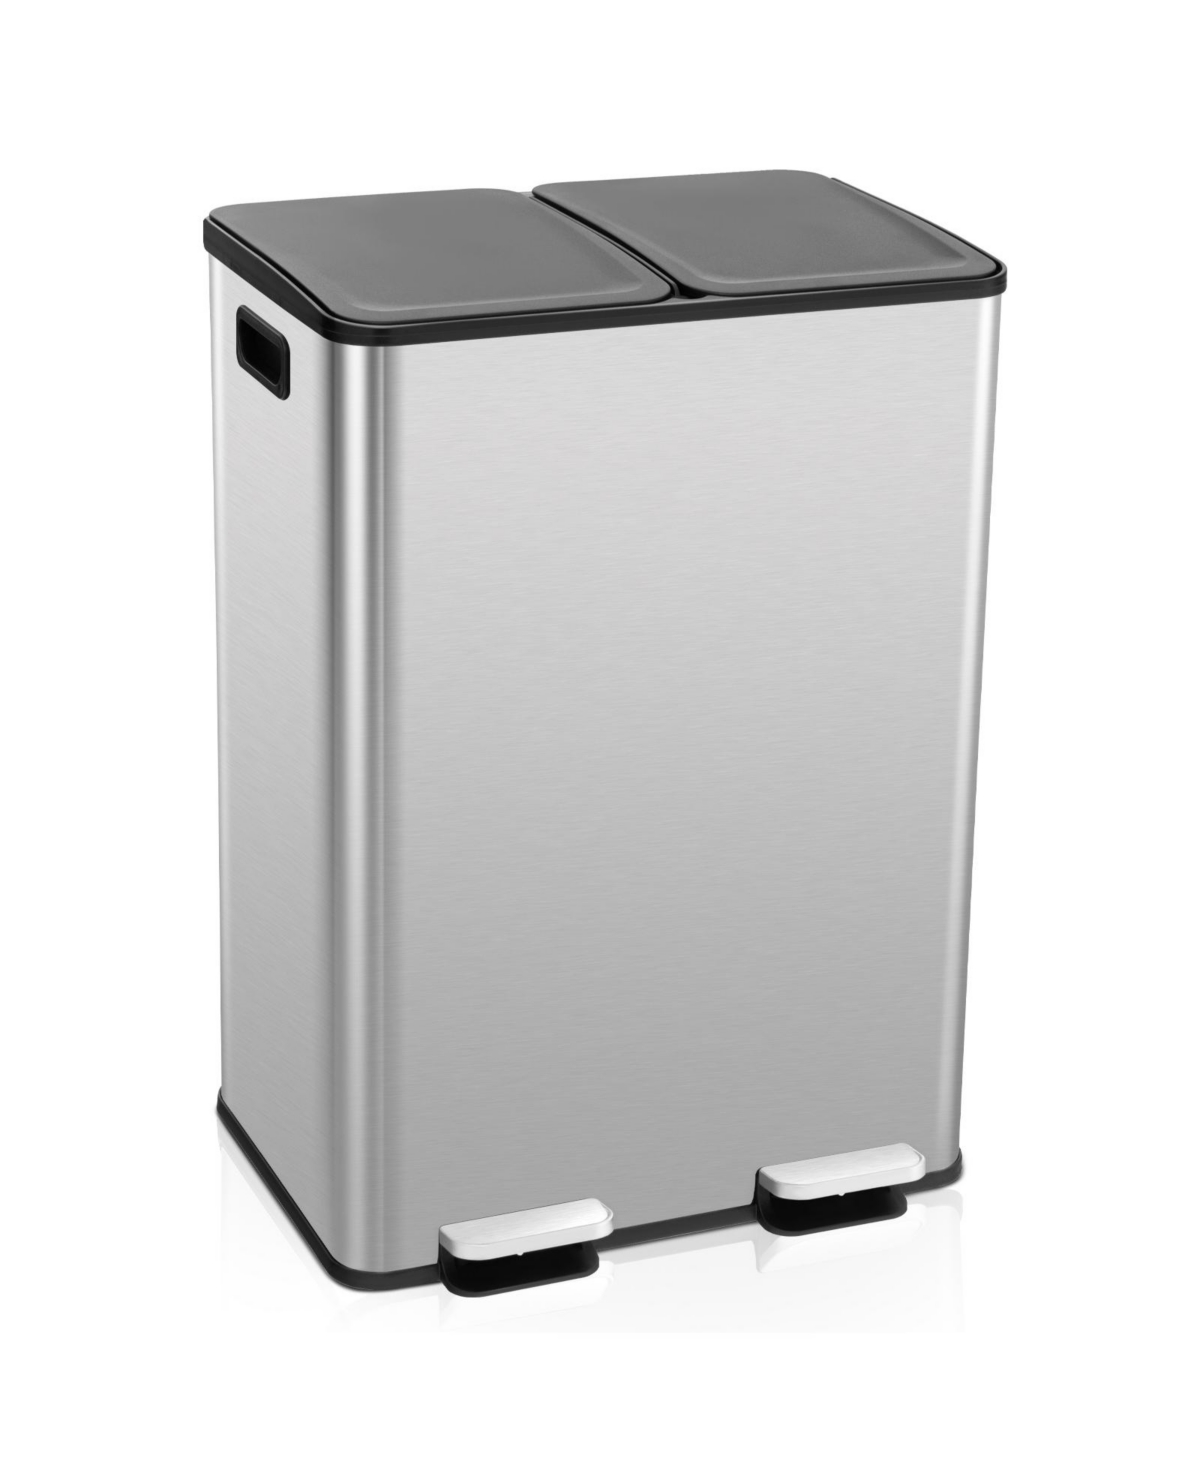 2 x 8 Gal Dual Compartment Trash Can-Silver - Silver